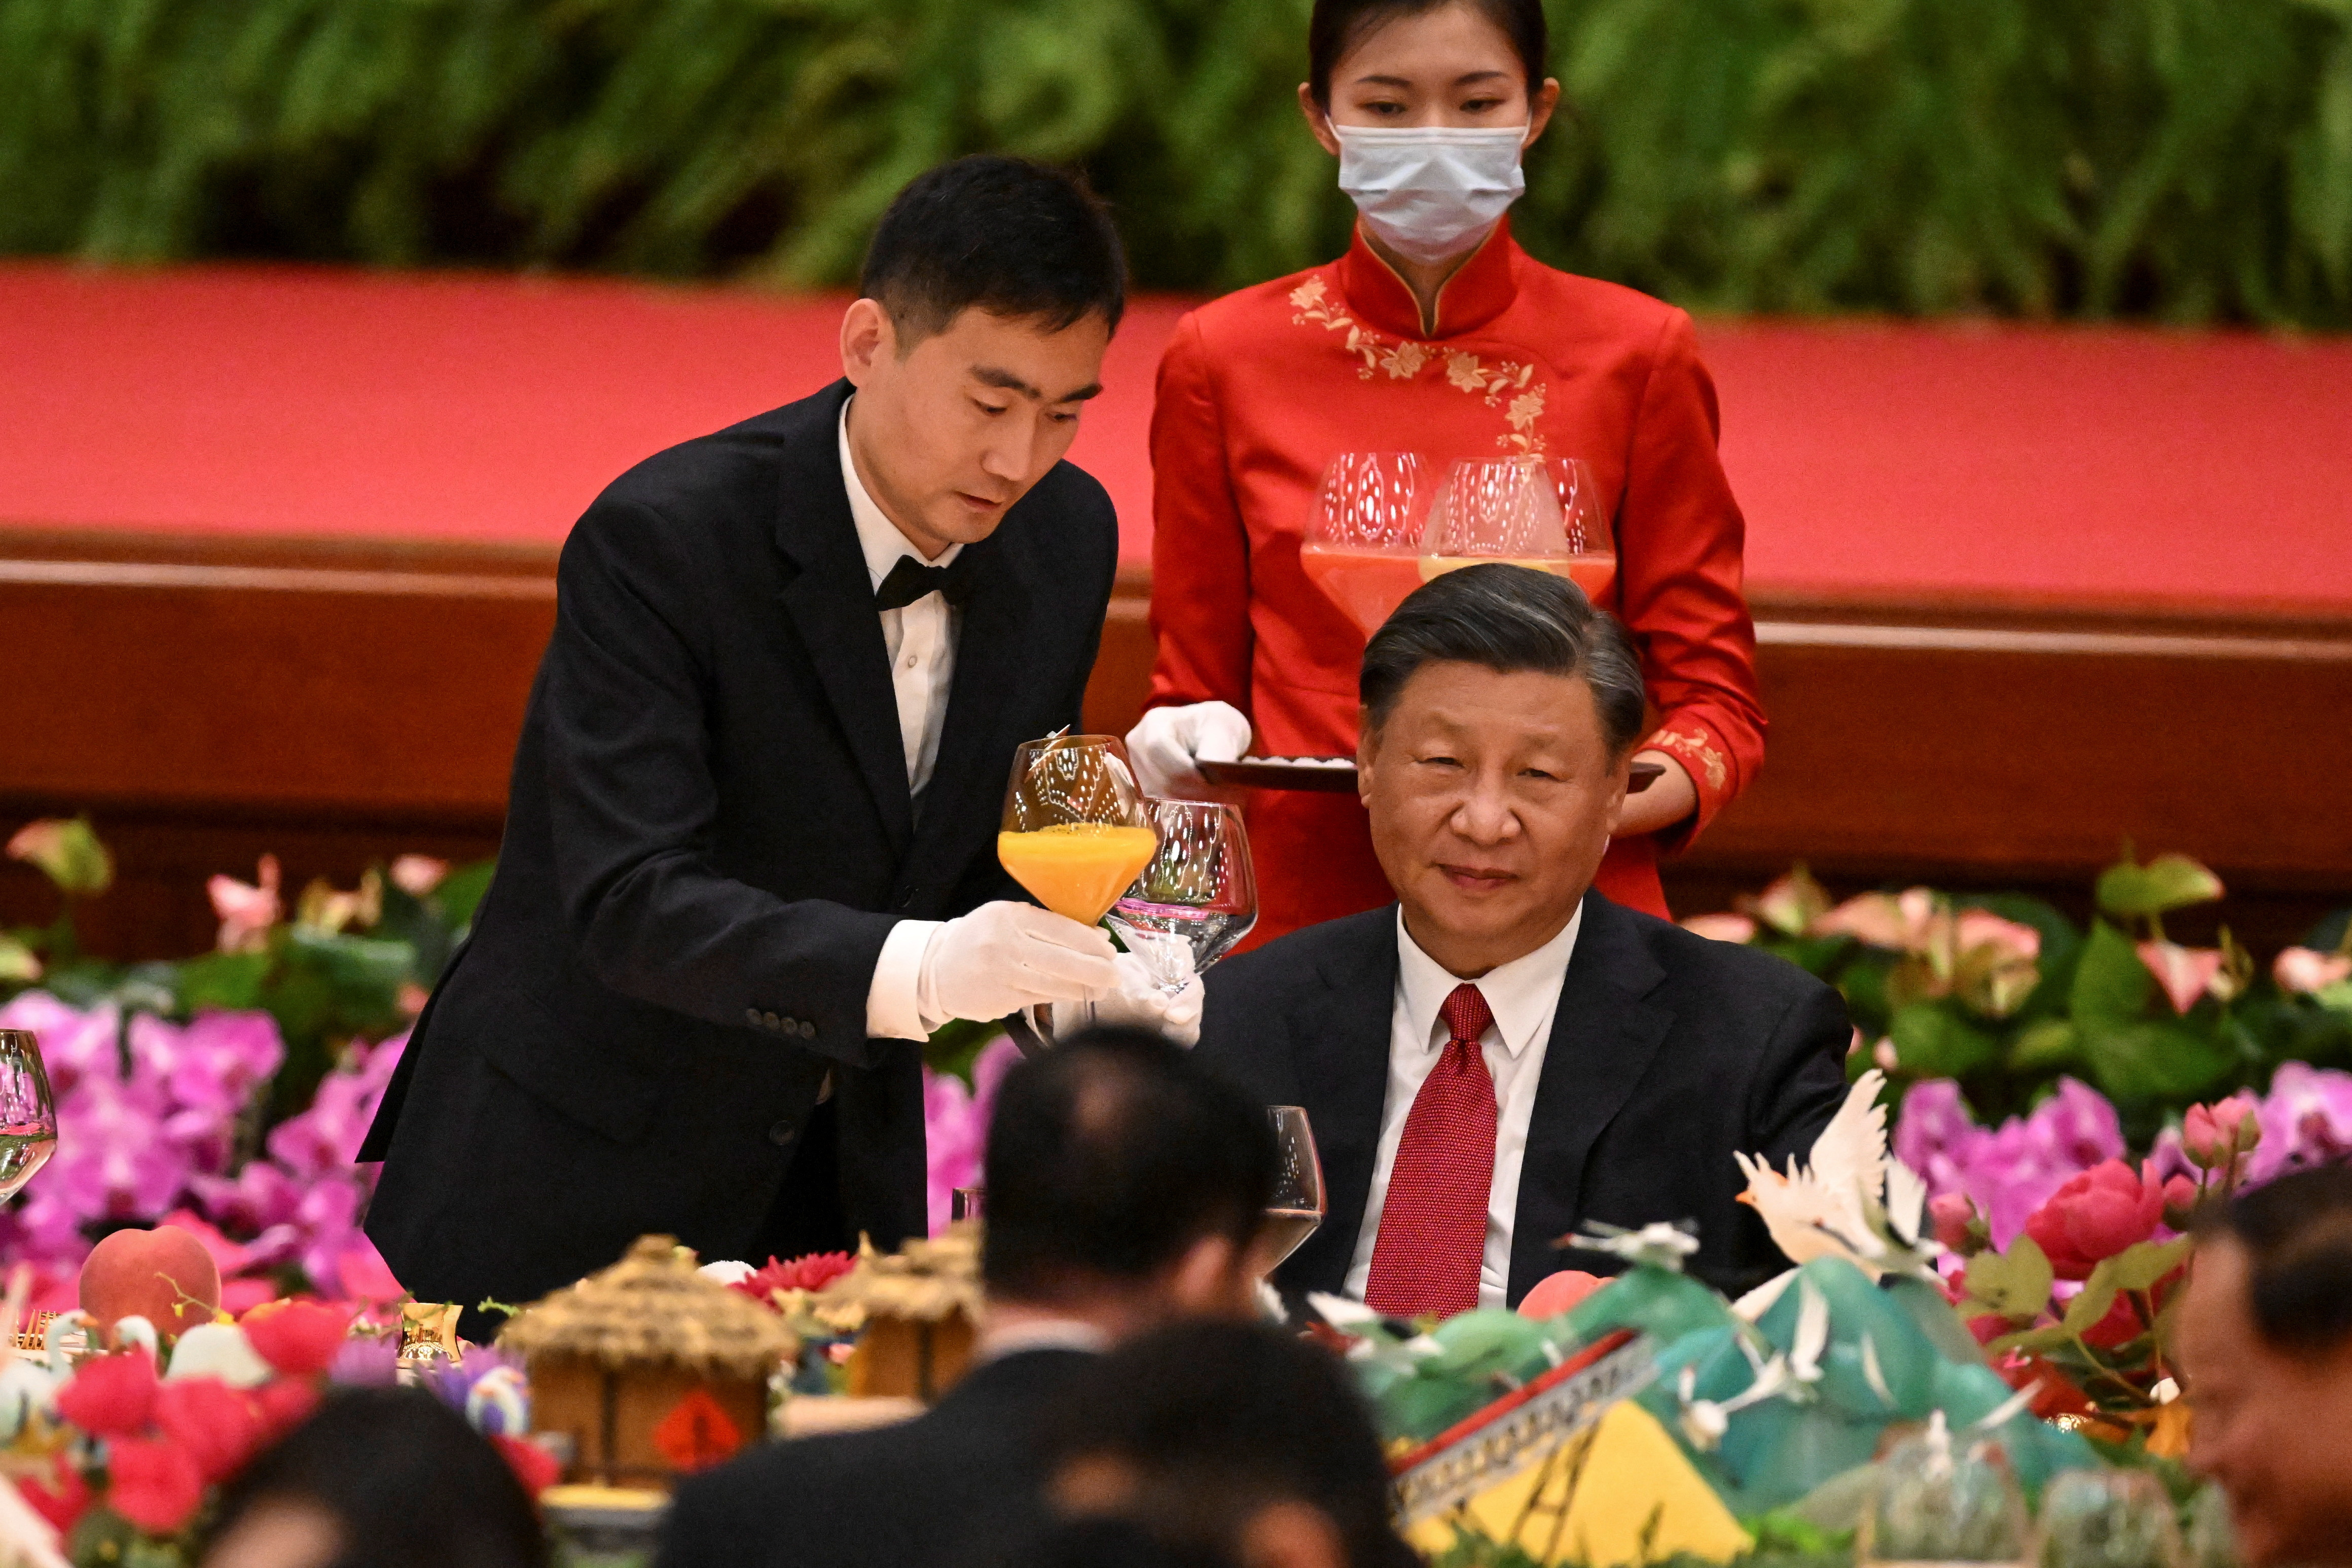 Reception ahead of China's National Day in Beijing